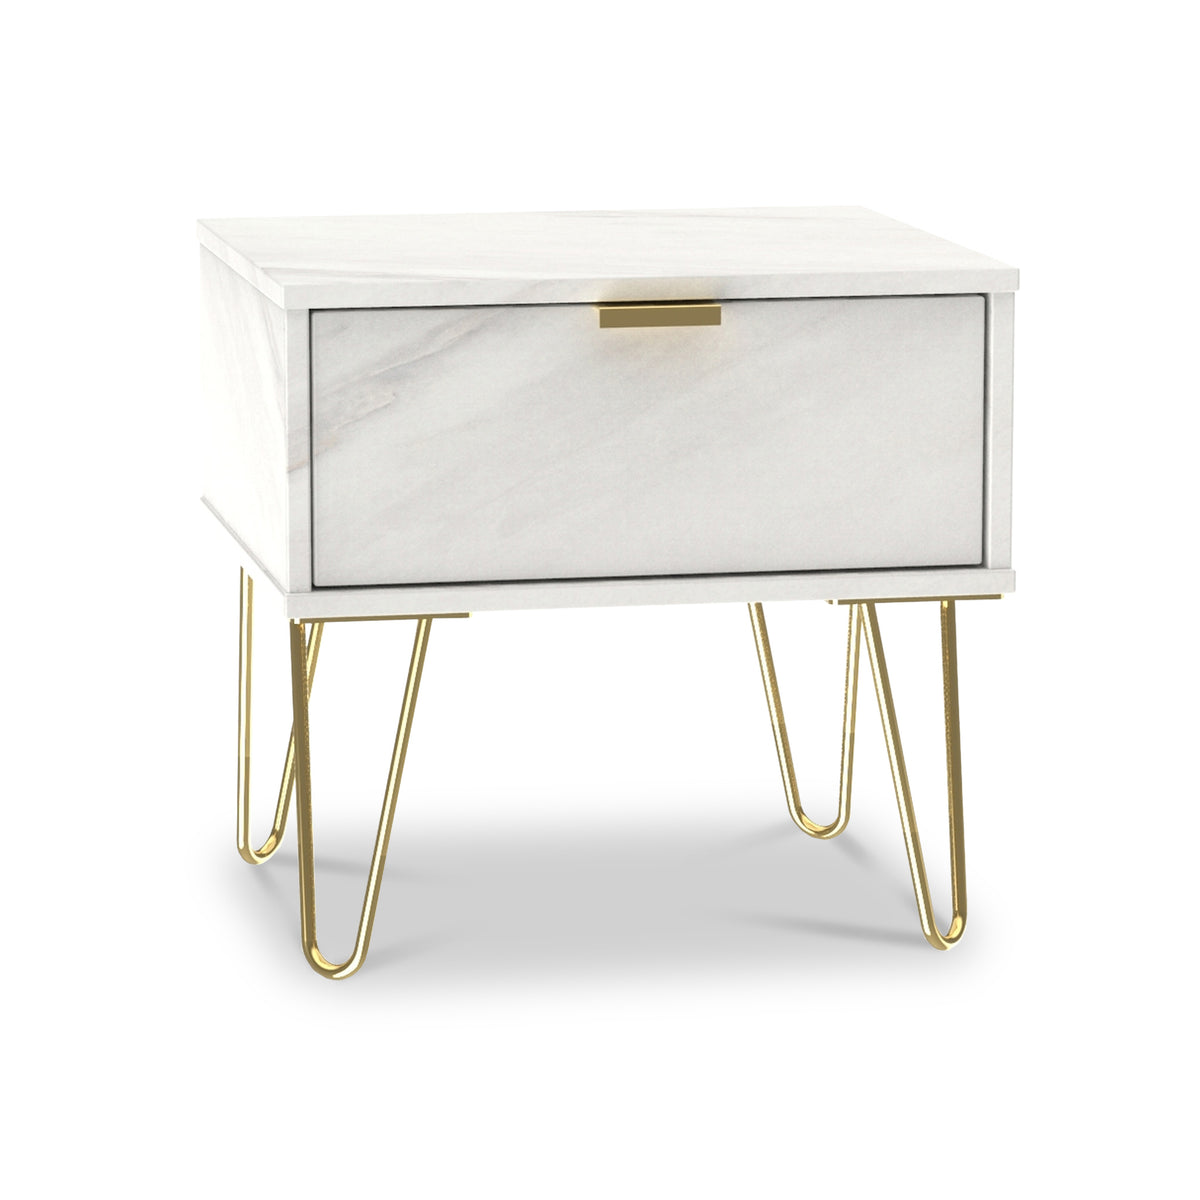 Moreno Marble Effect 1 Drawer White Bedside Table from Roseland Furniture